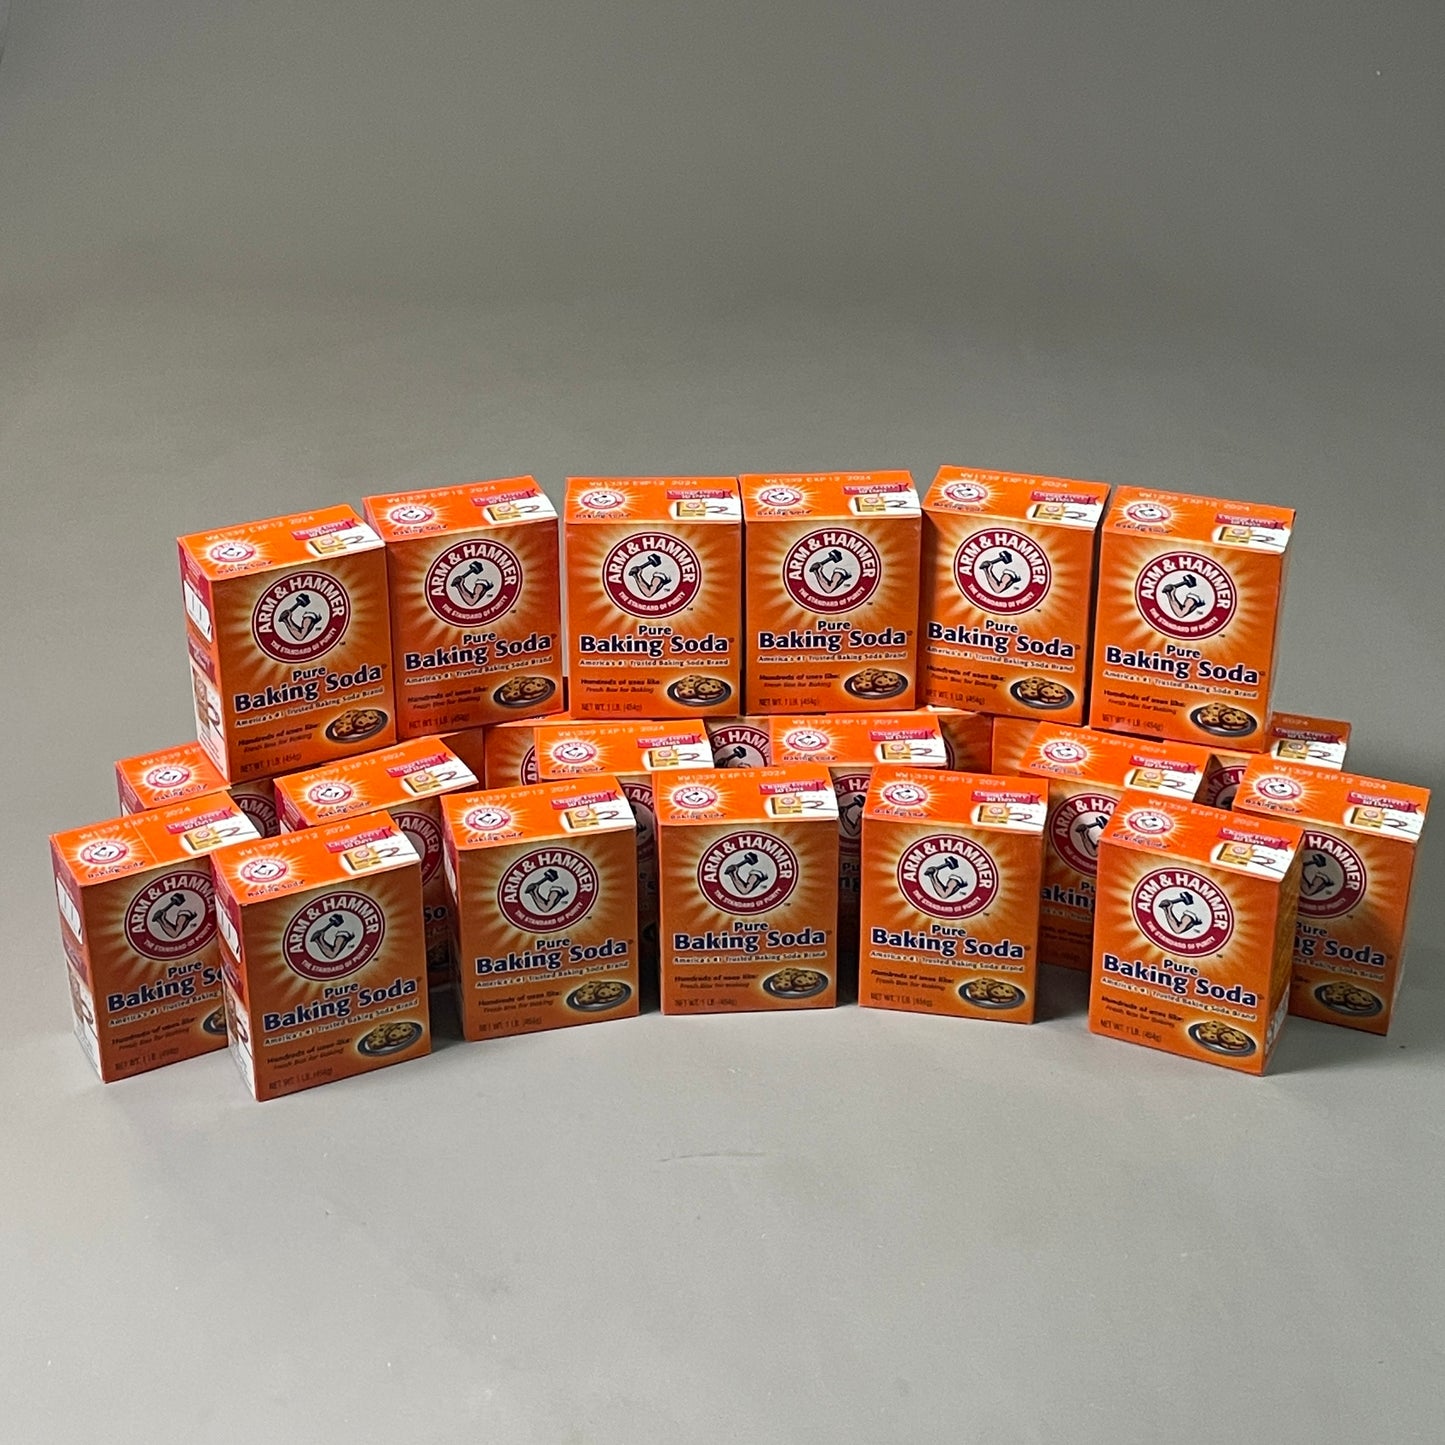 ARM & HAMMER Pure Baking Soda 24-Pack 1 Lb Boxes Exp 12/24 (New)